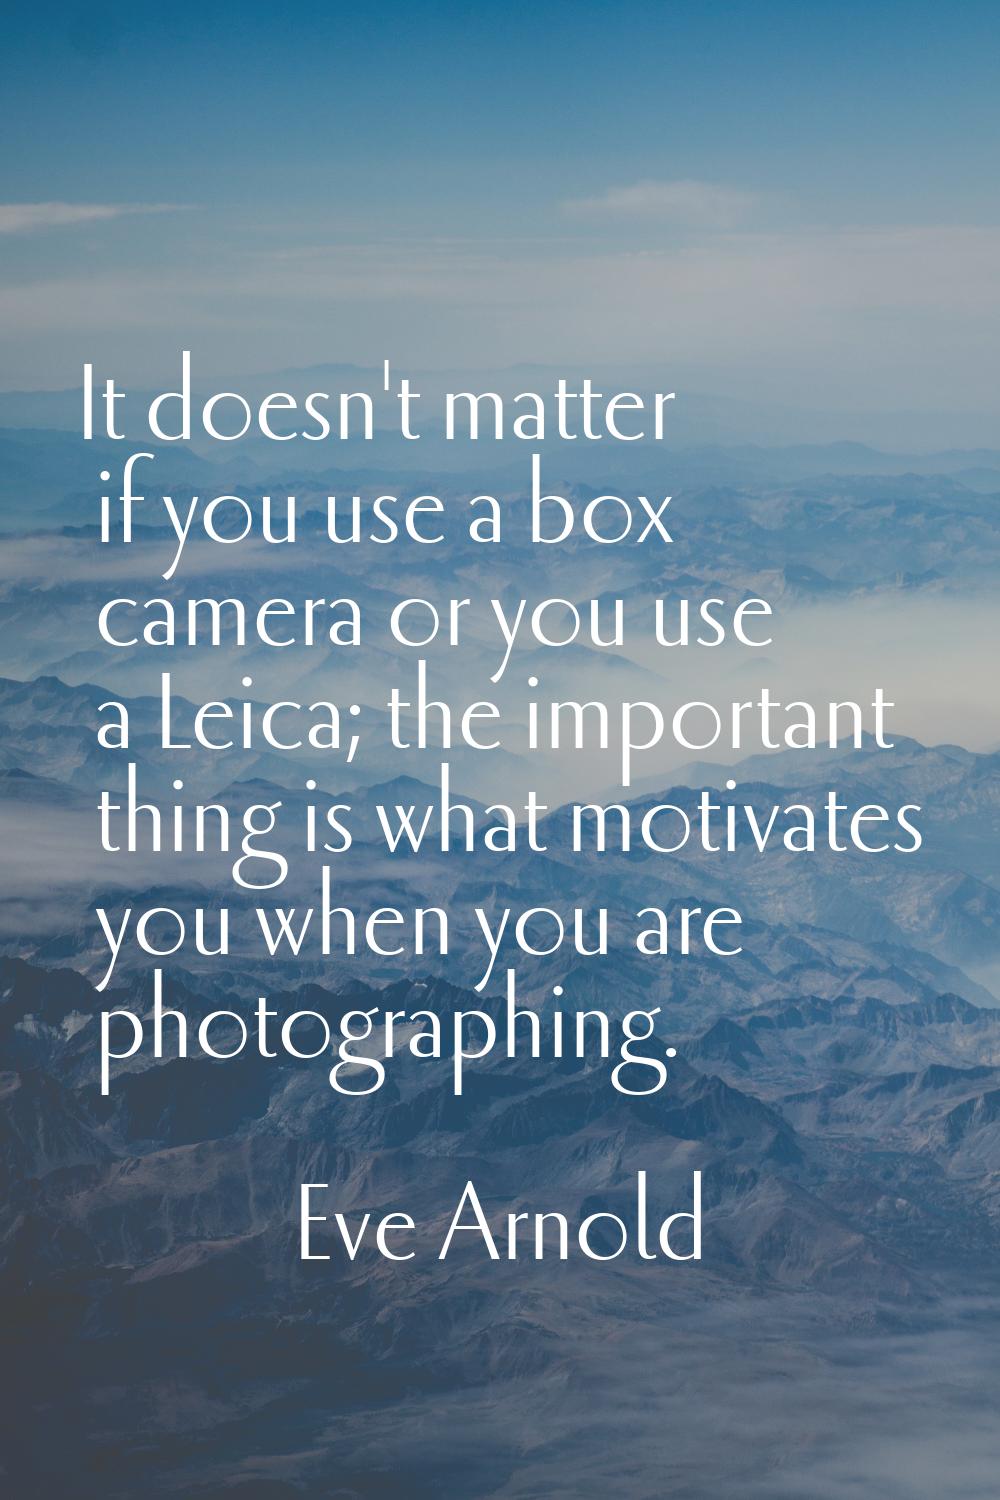 It doesn't matter if you use a box camera or you use a Leica; the important thing is what motivates